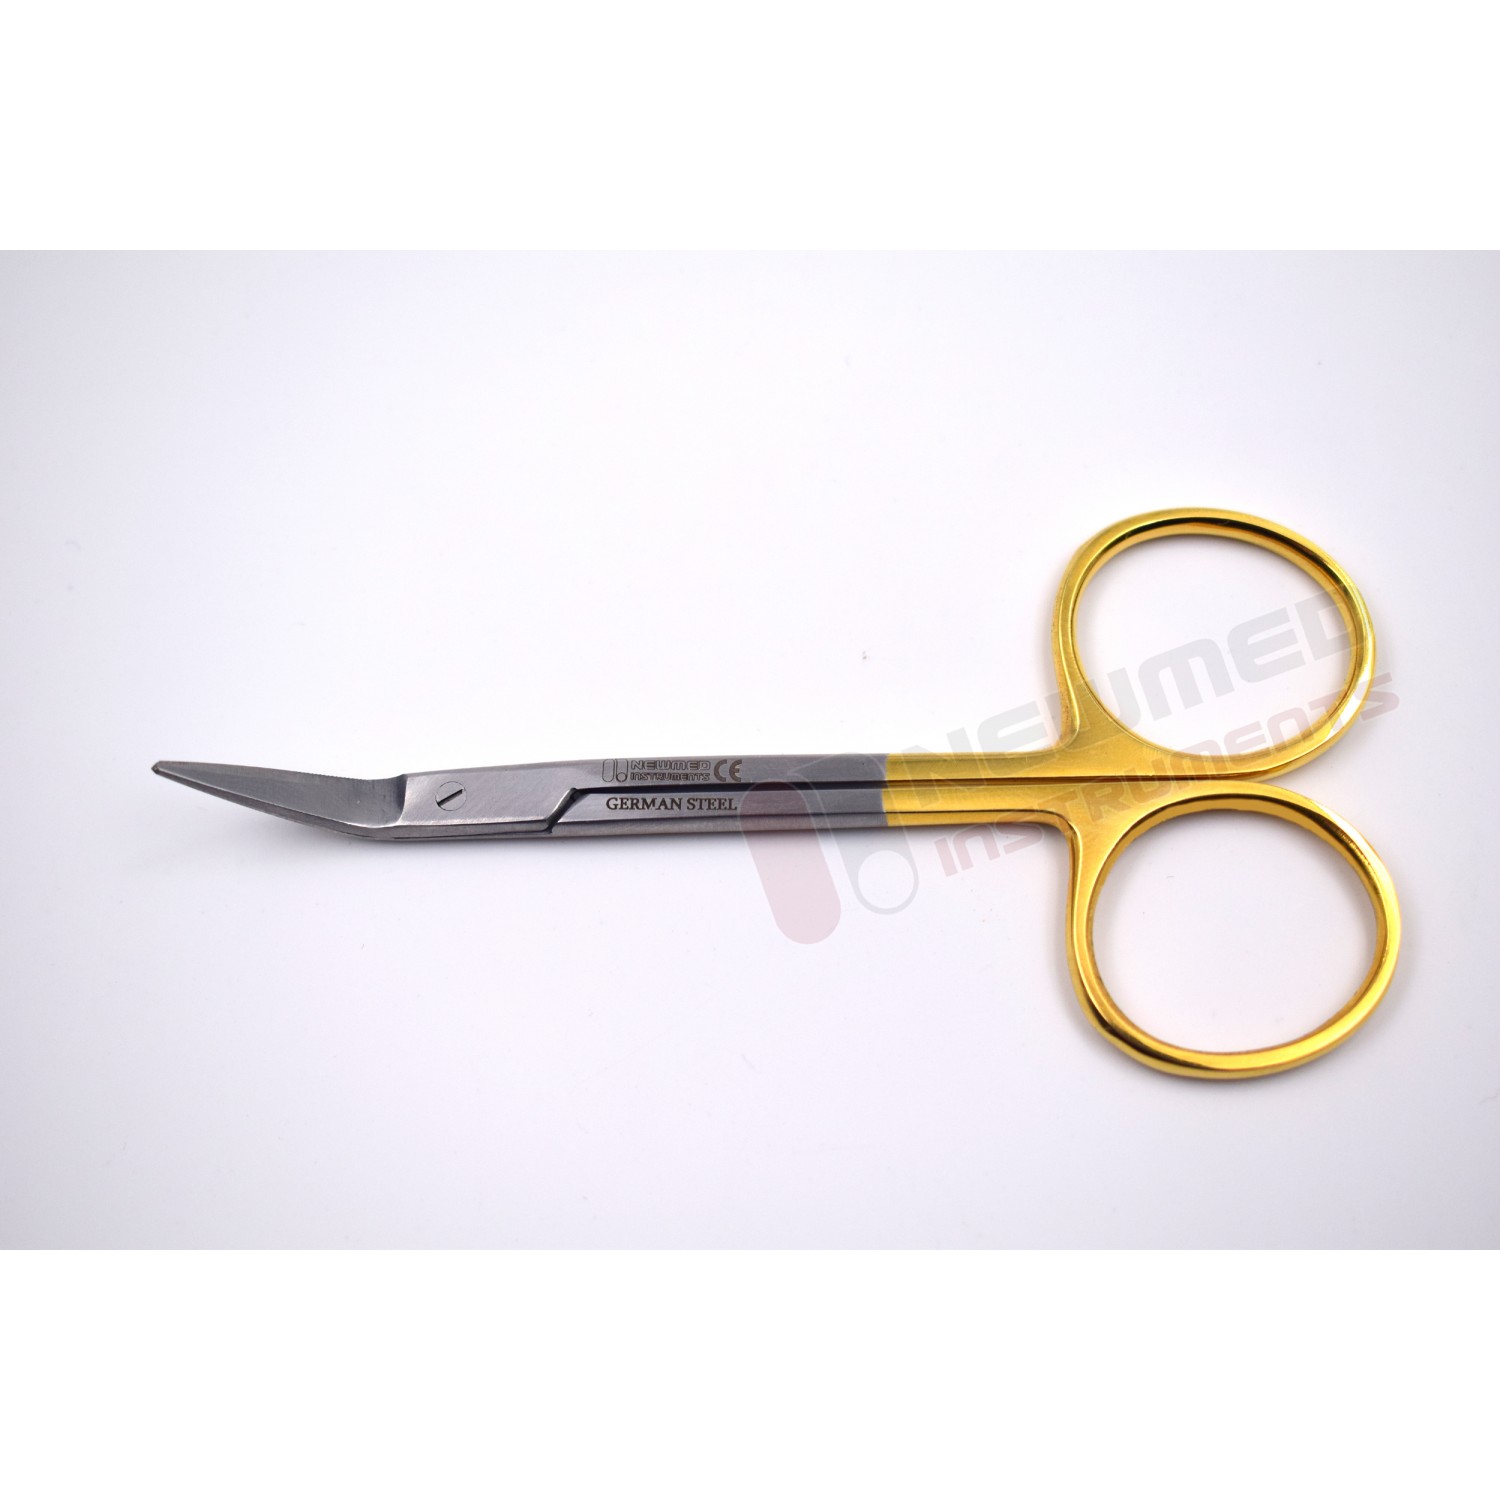 Heavy Duty Blunt Nose KEVLAR® Scissors / Cutters ***MADE IN THE